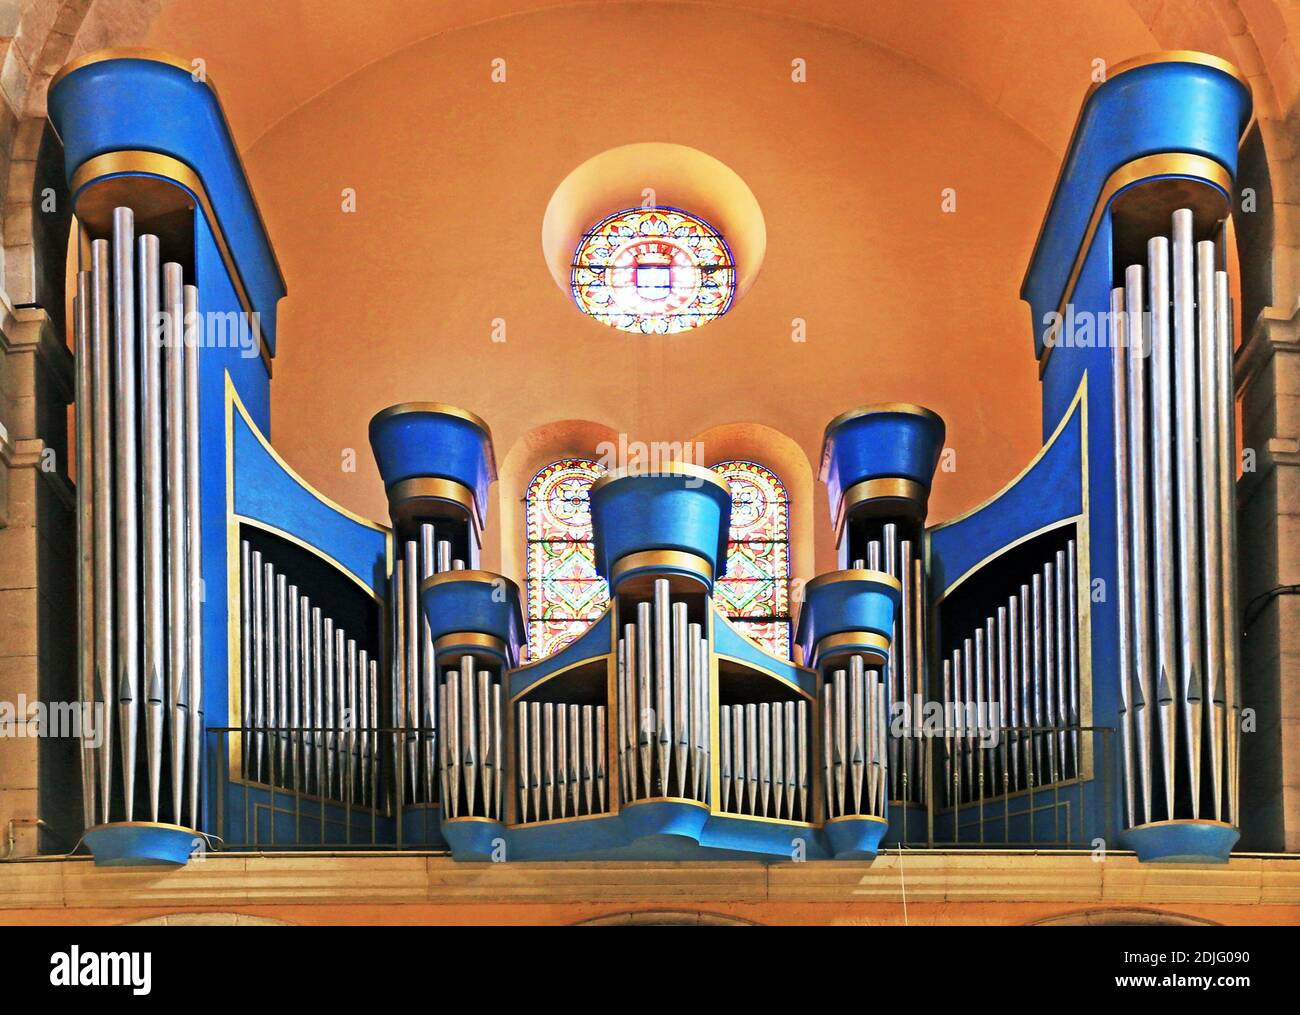 Large church organs in a colorful baroque style. Stock Photo